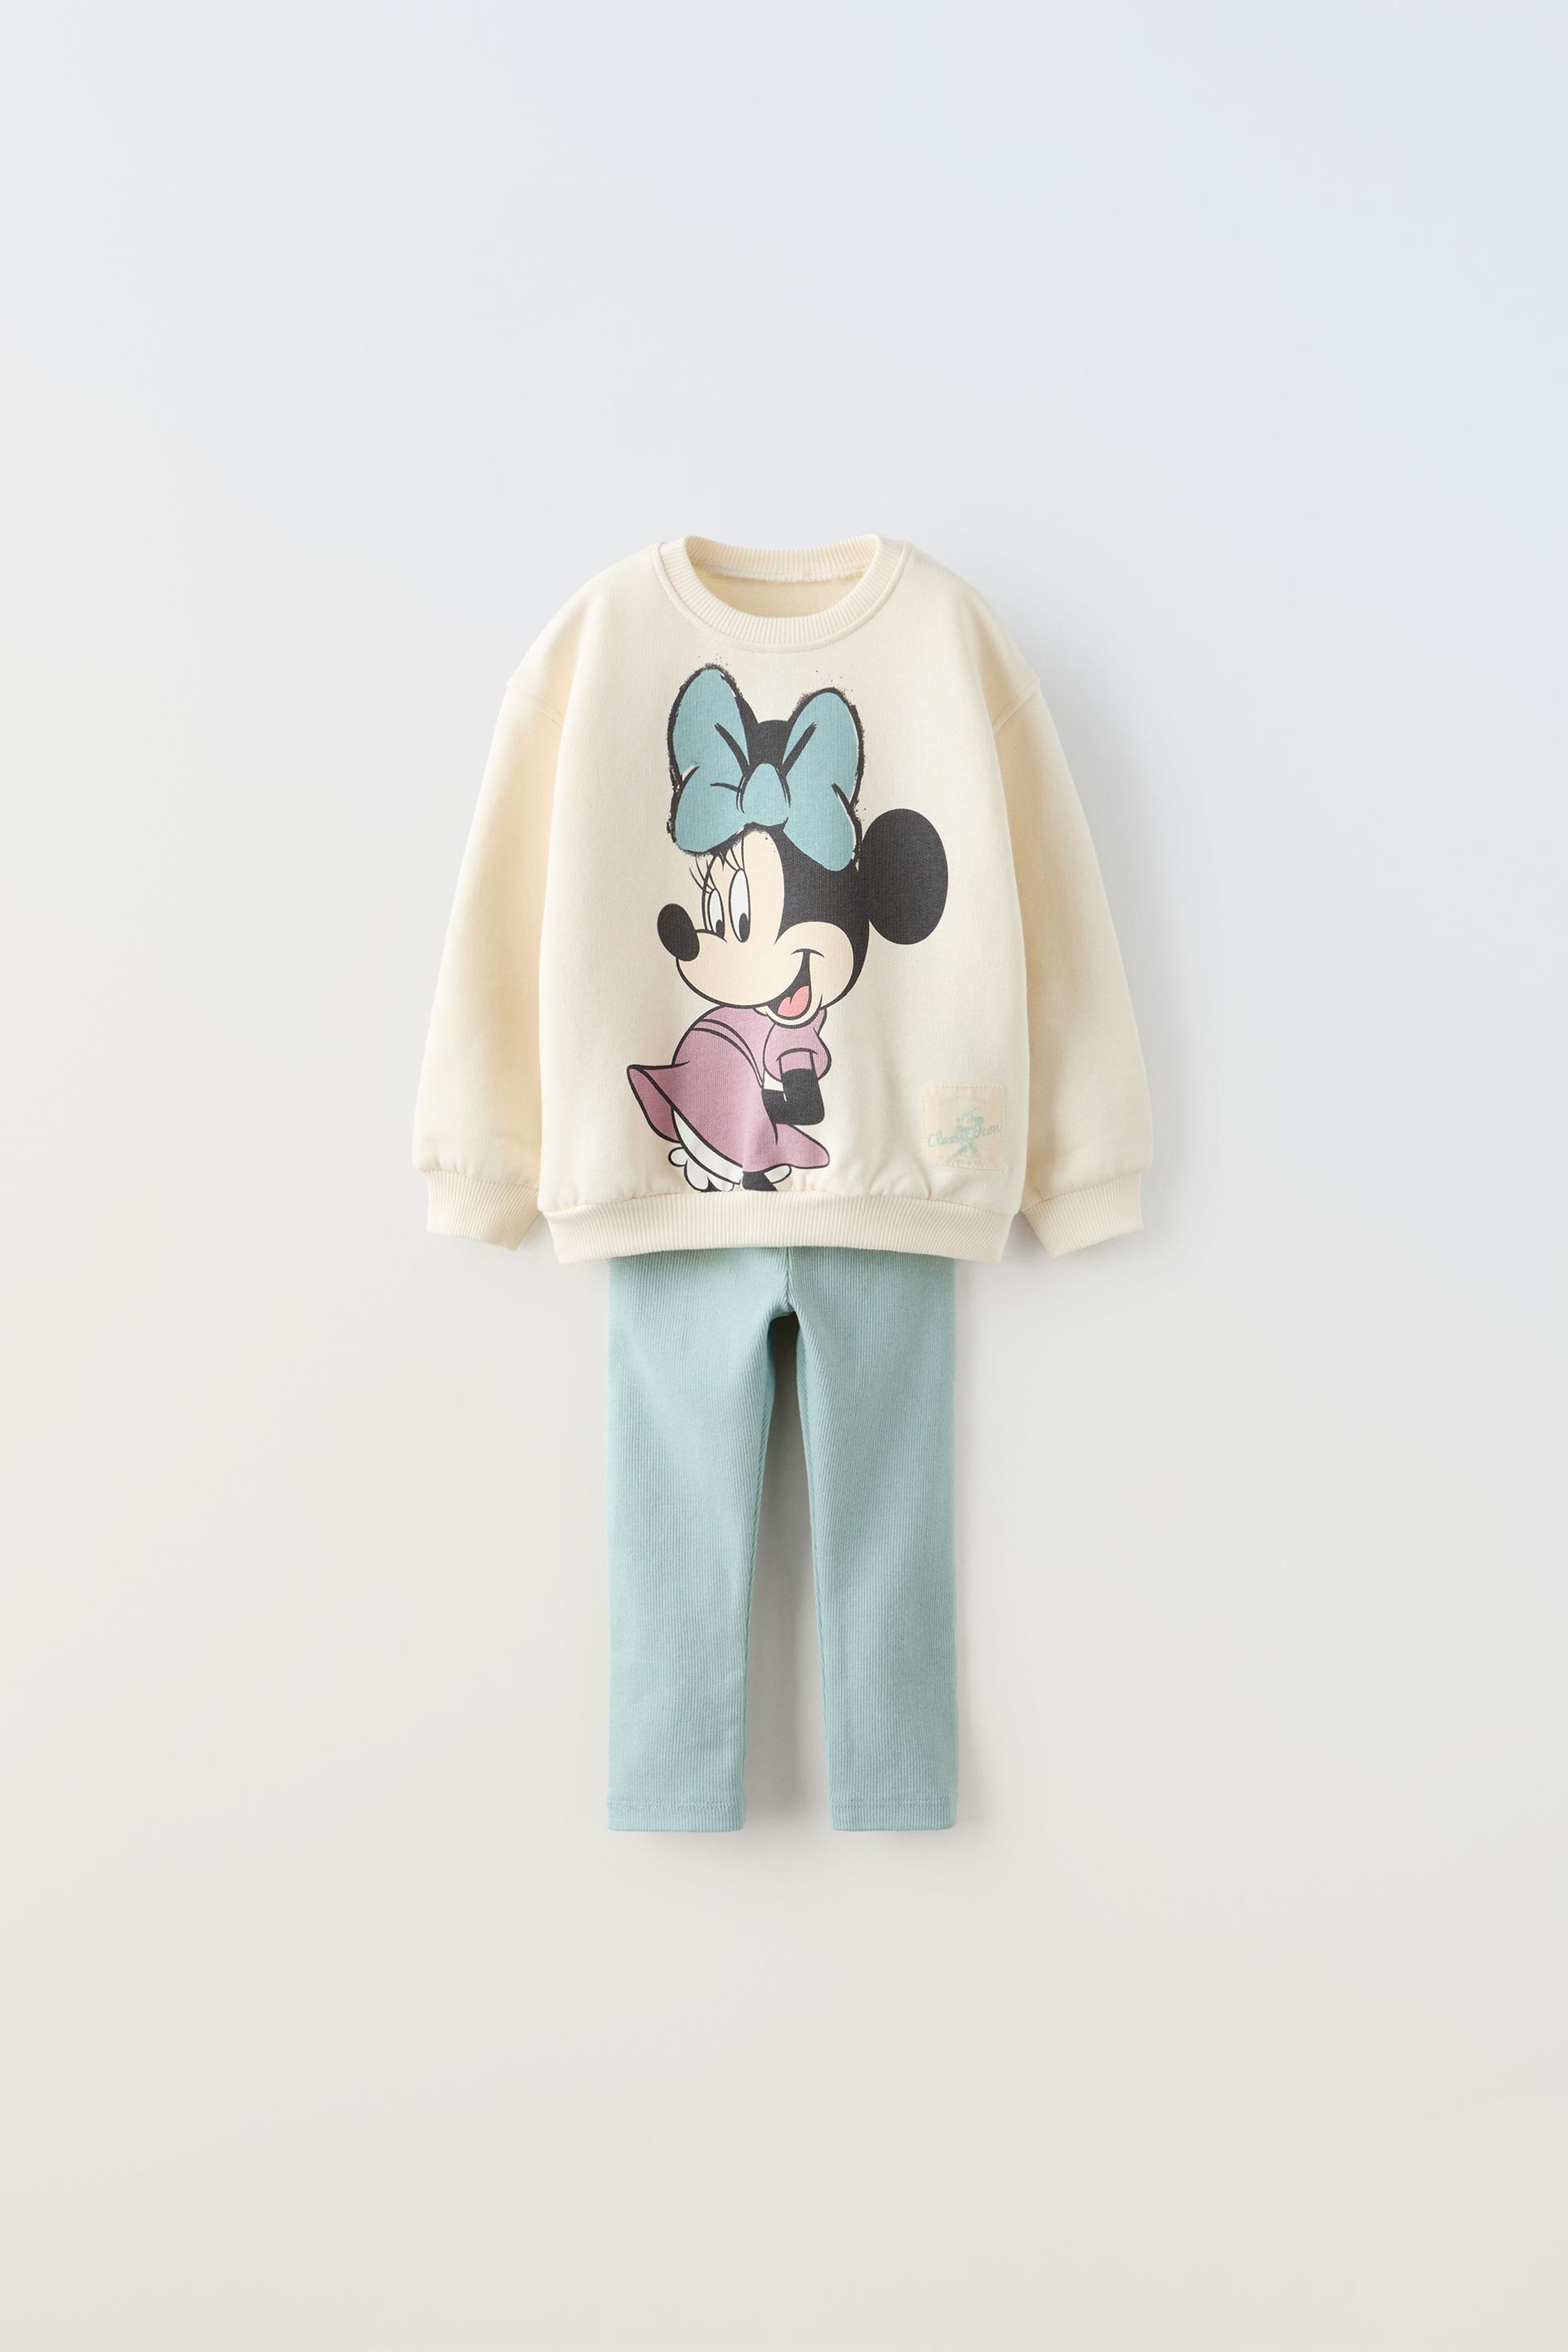 Disney Minnie Mouse  imagikids Baby and Kids Clothing